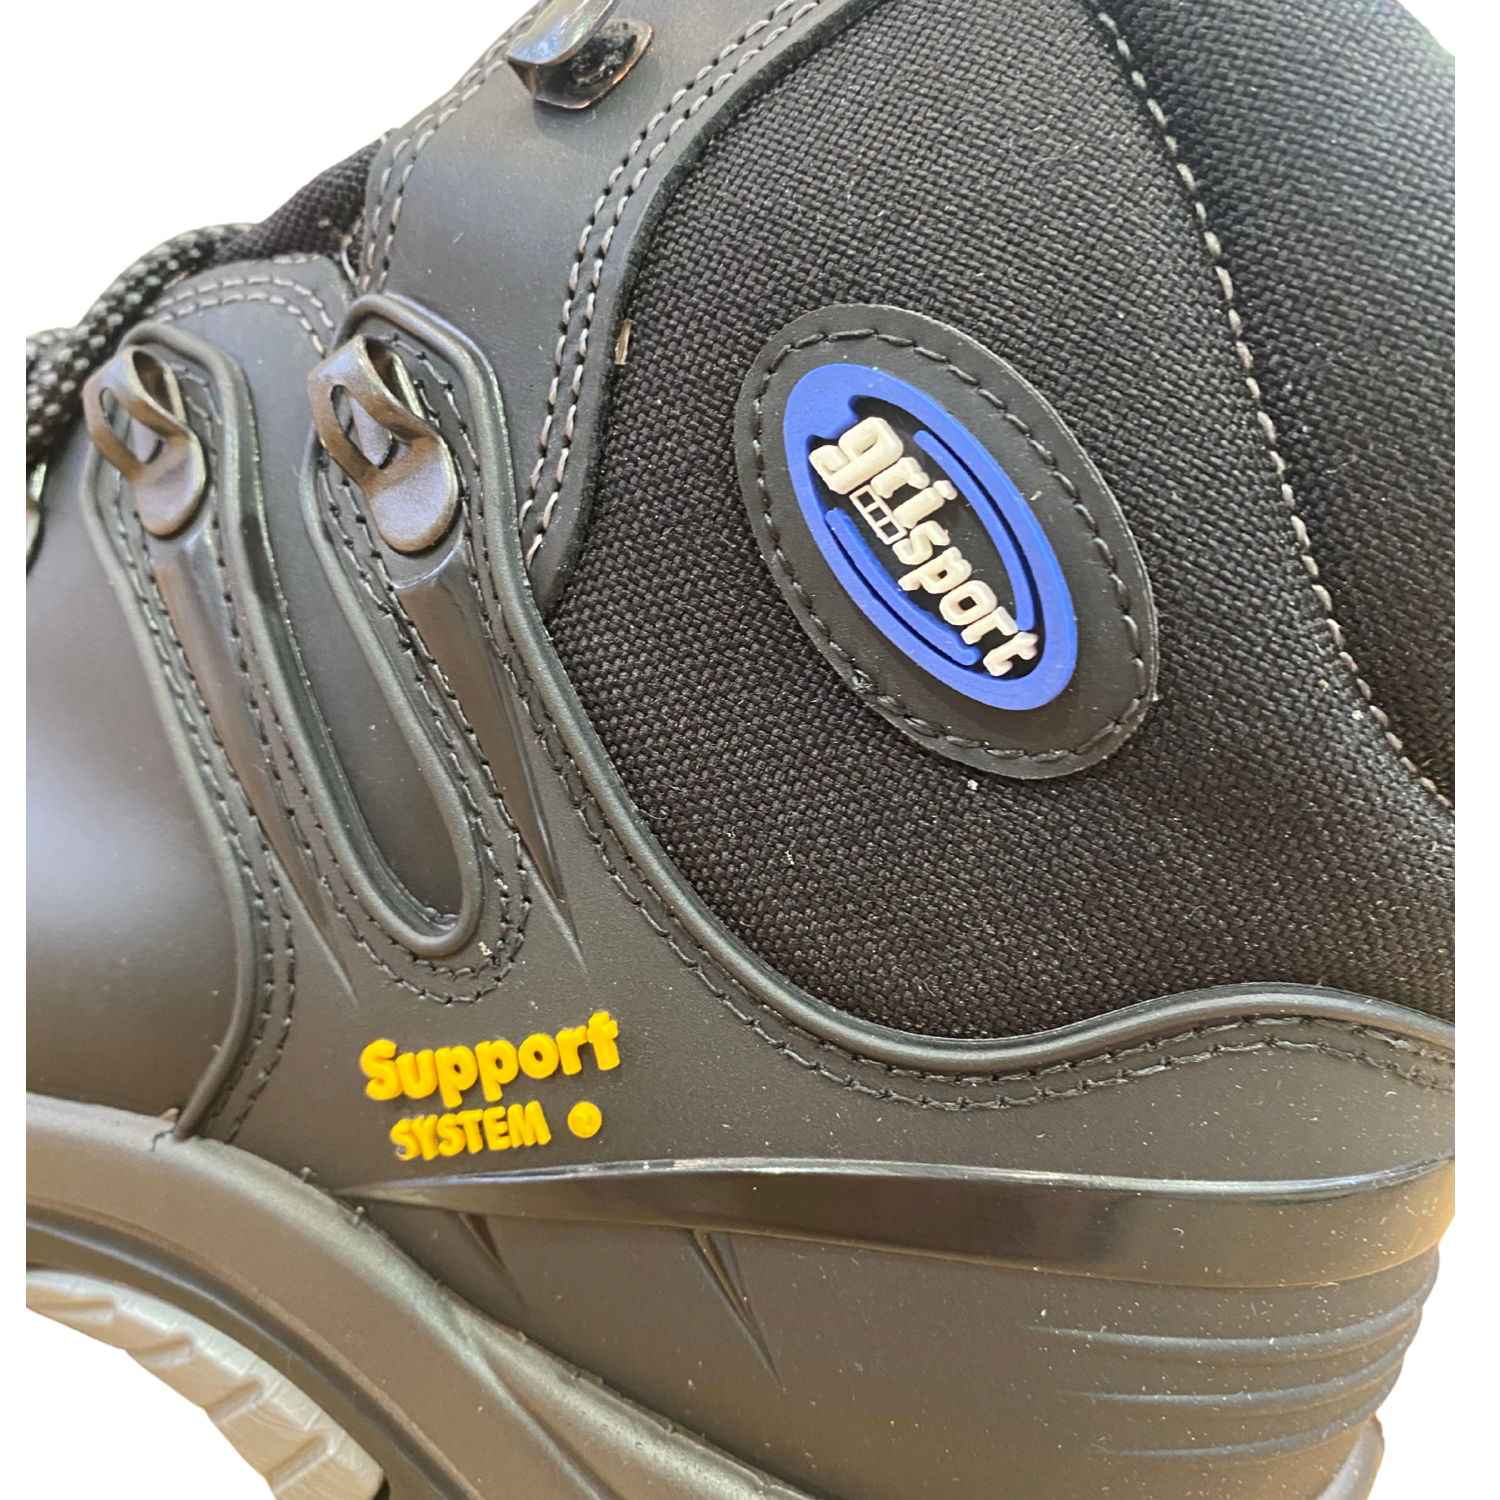 Grisport Workmate - Saftey Boot in Black Comfortable Black Boot with Saftey Toe and ABS Shock absobing heel. GriSport Shoes | Saftey Boots | Wisemans | Bantry | West Cork | Munster | Ireland